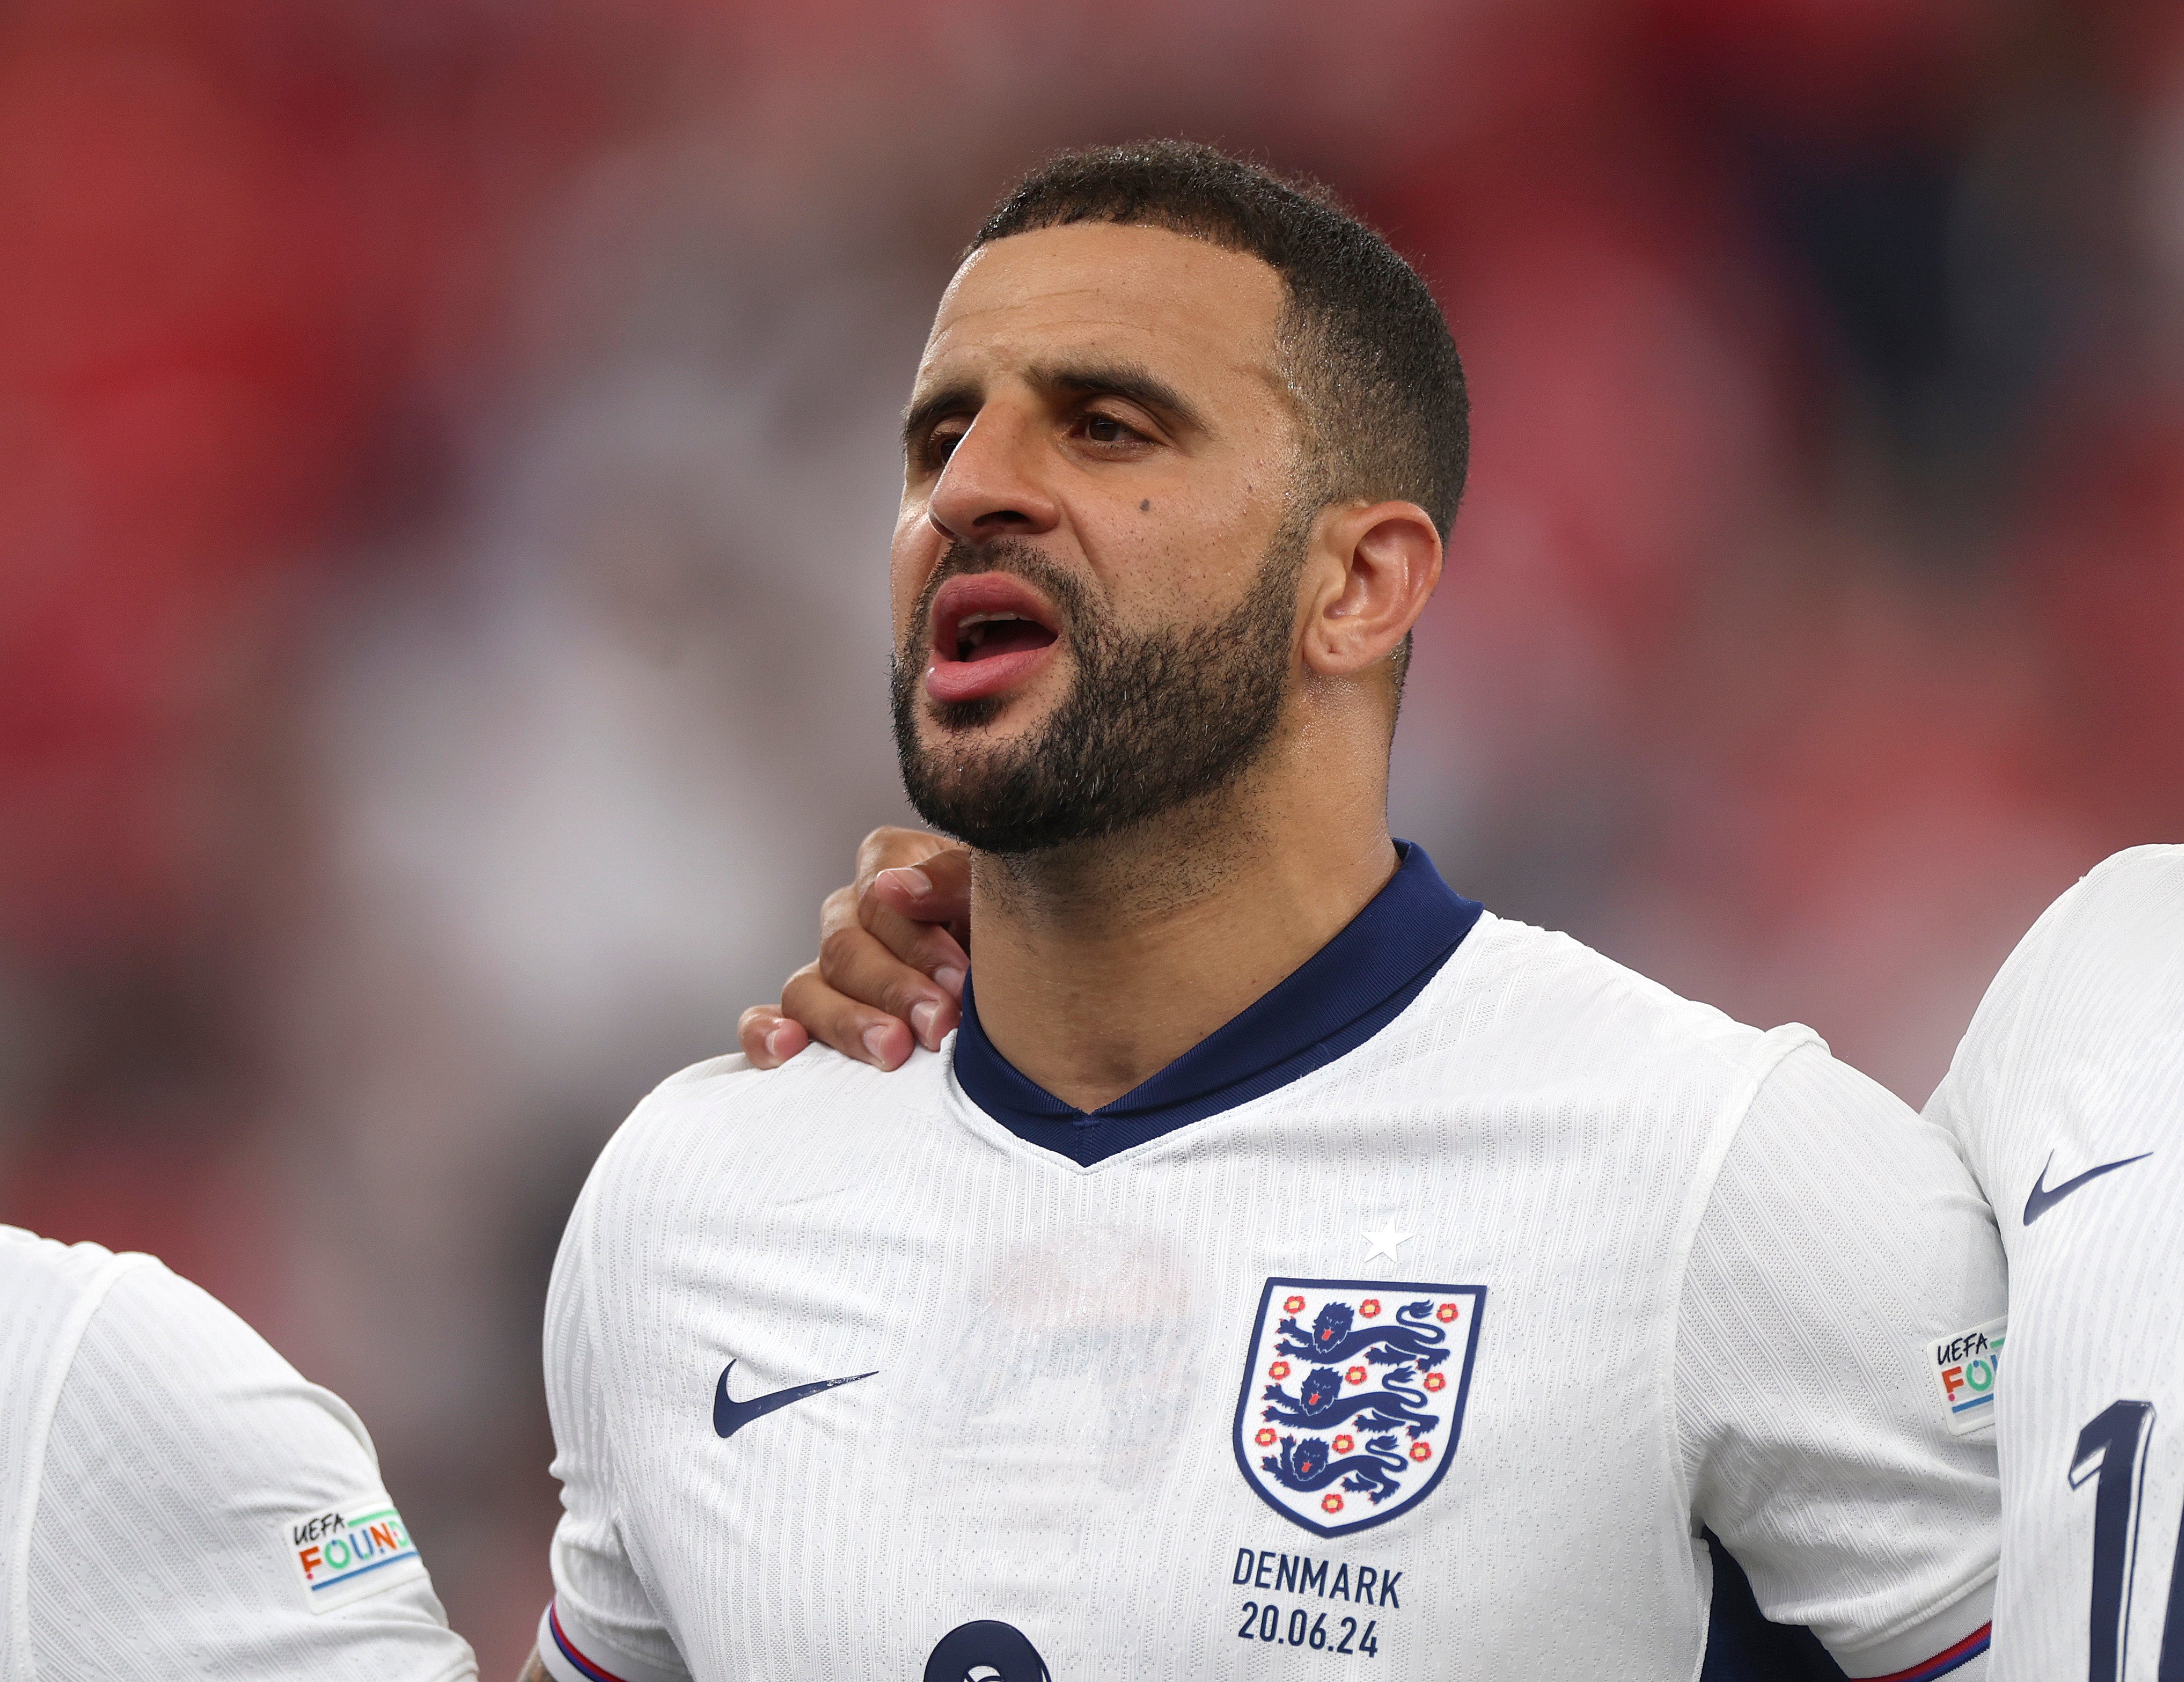 England vice-captain Kyle Walker publicly apologised to wife in January for infidelity and said he had made ‘idiot decisions’